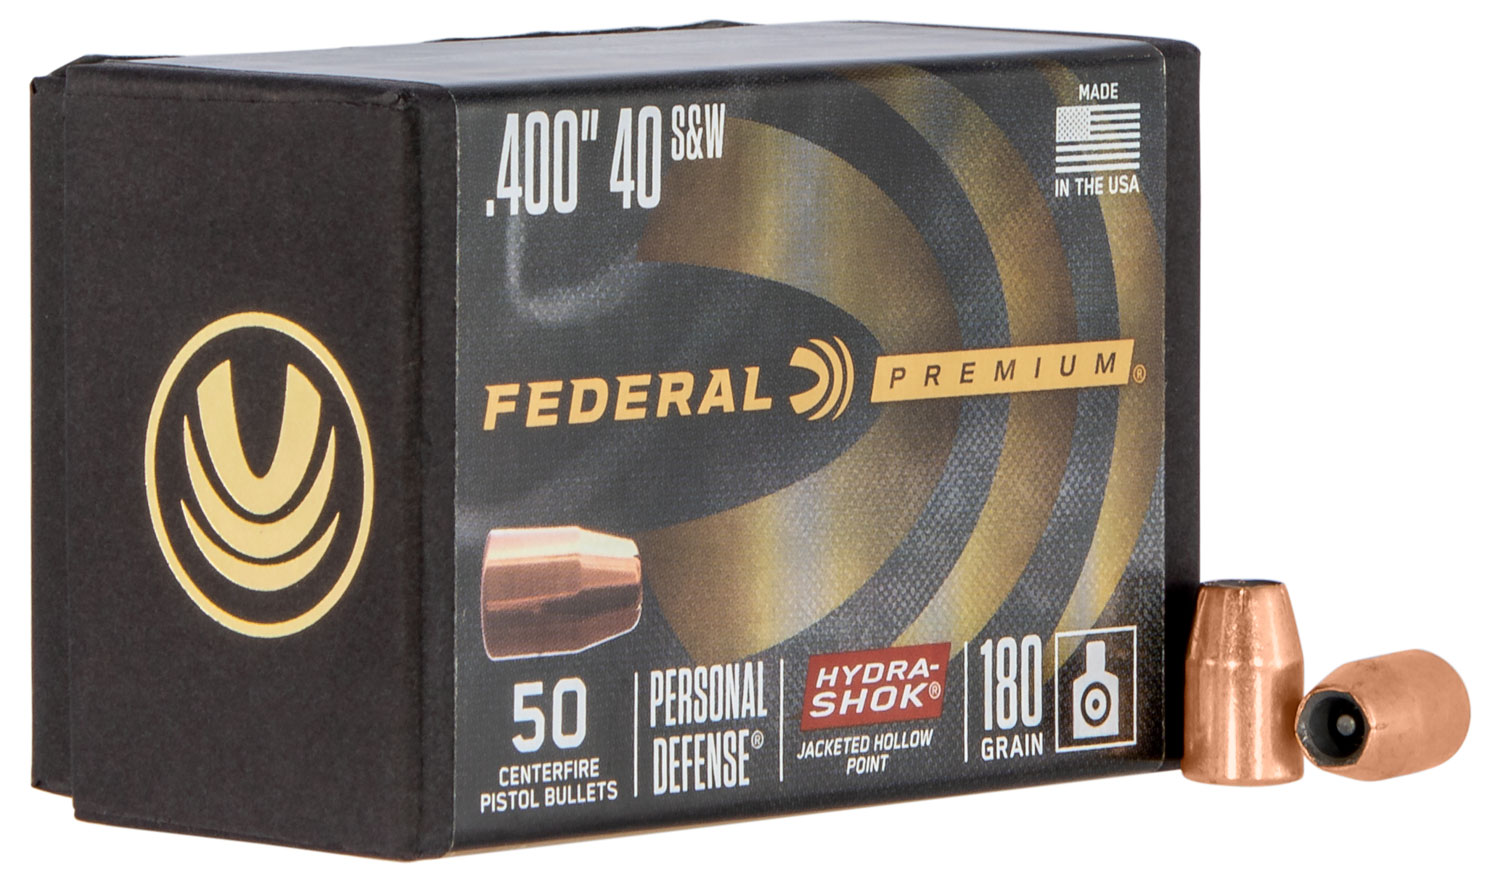 Federal PB40HS180 Hydra-Shok Component  10mm/40 S&W .400 180 GR Jacketed Hollow Point 50 Box